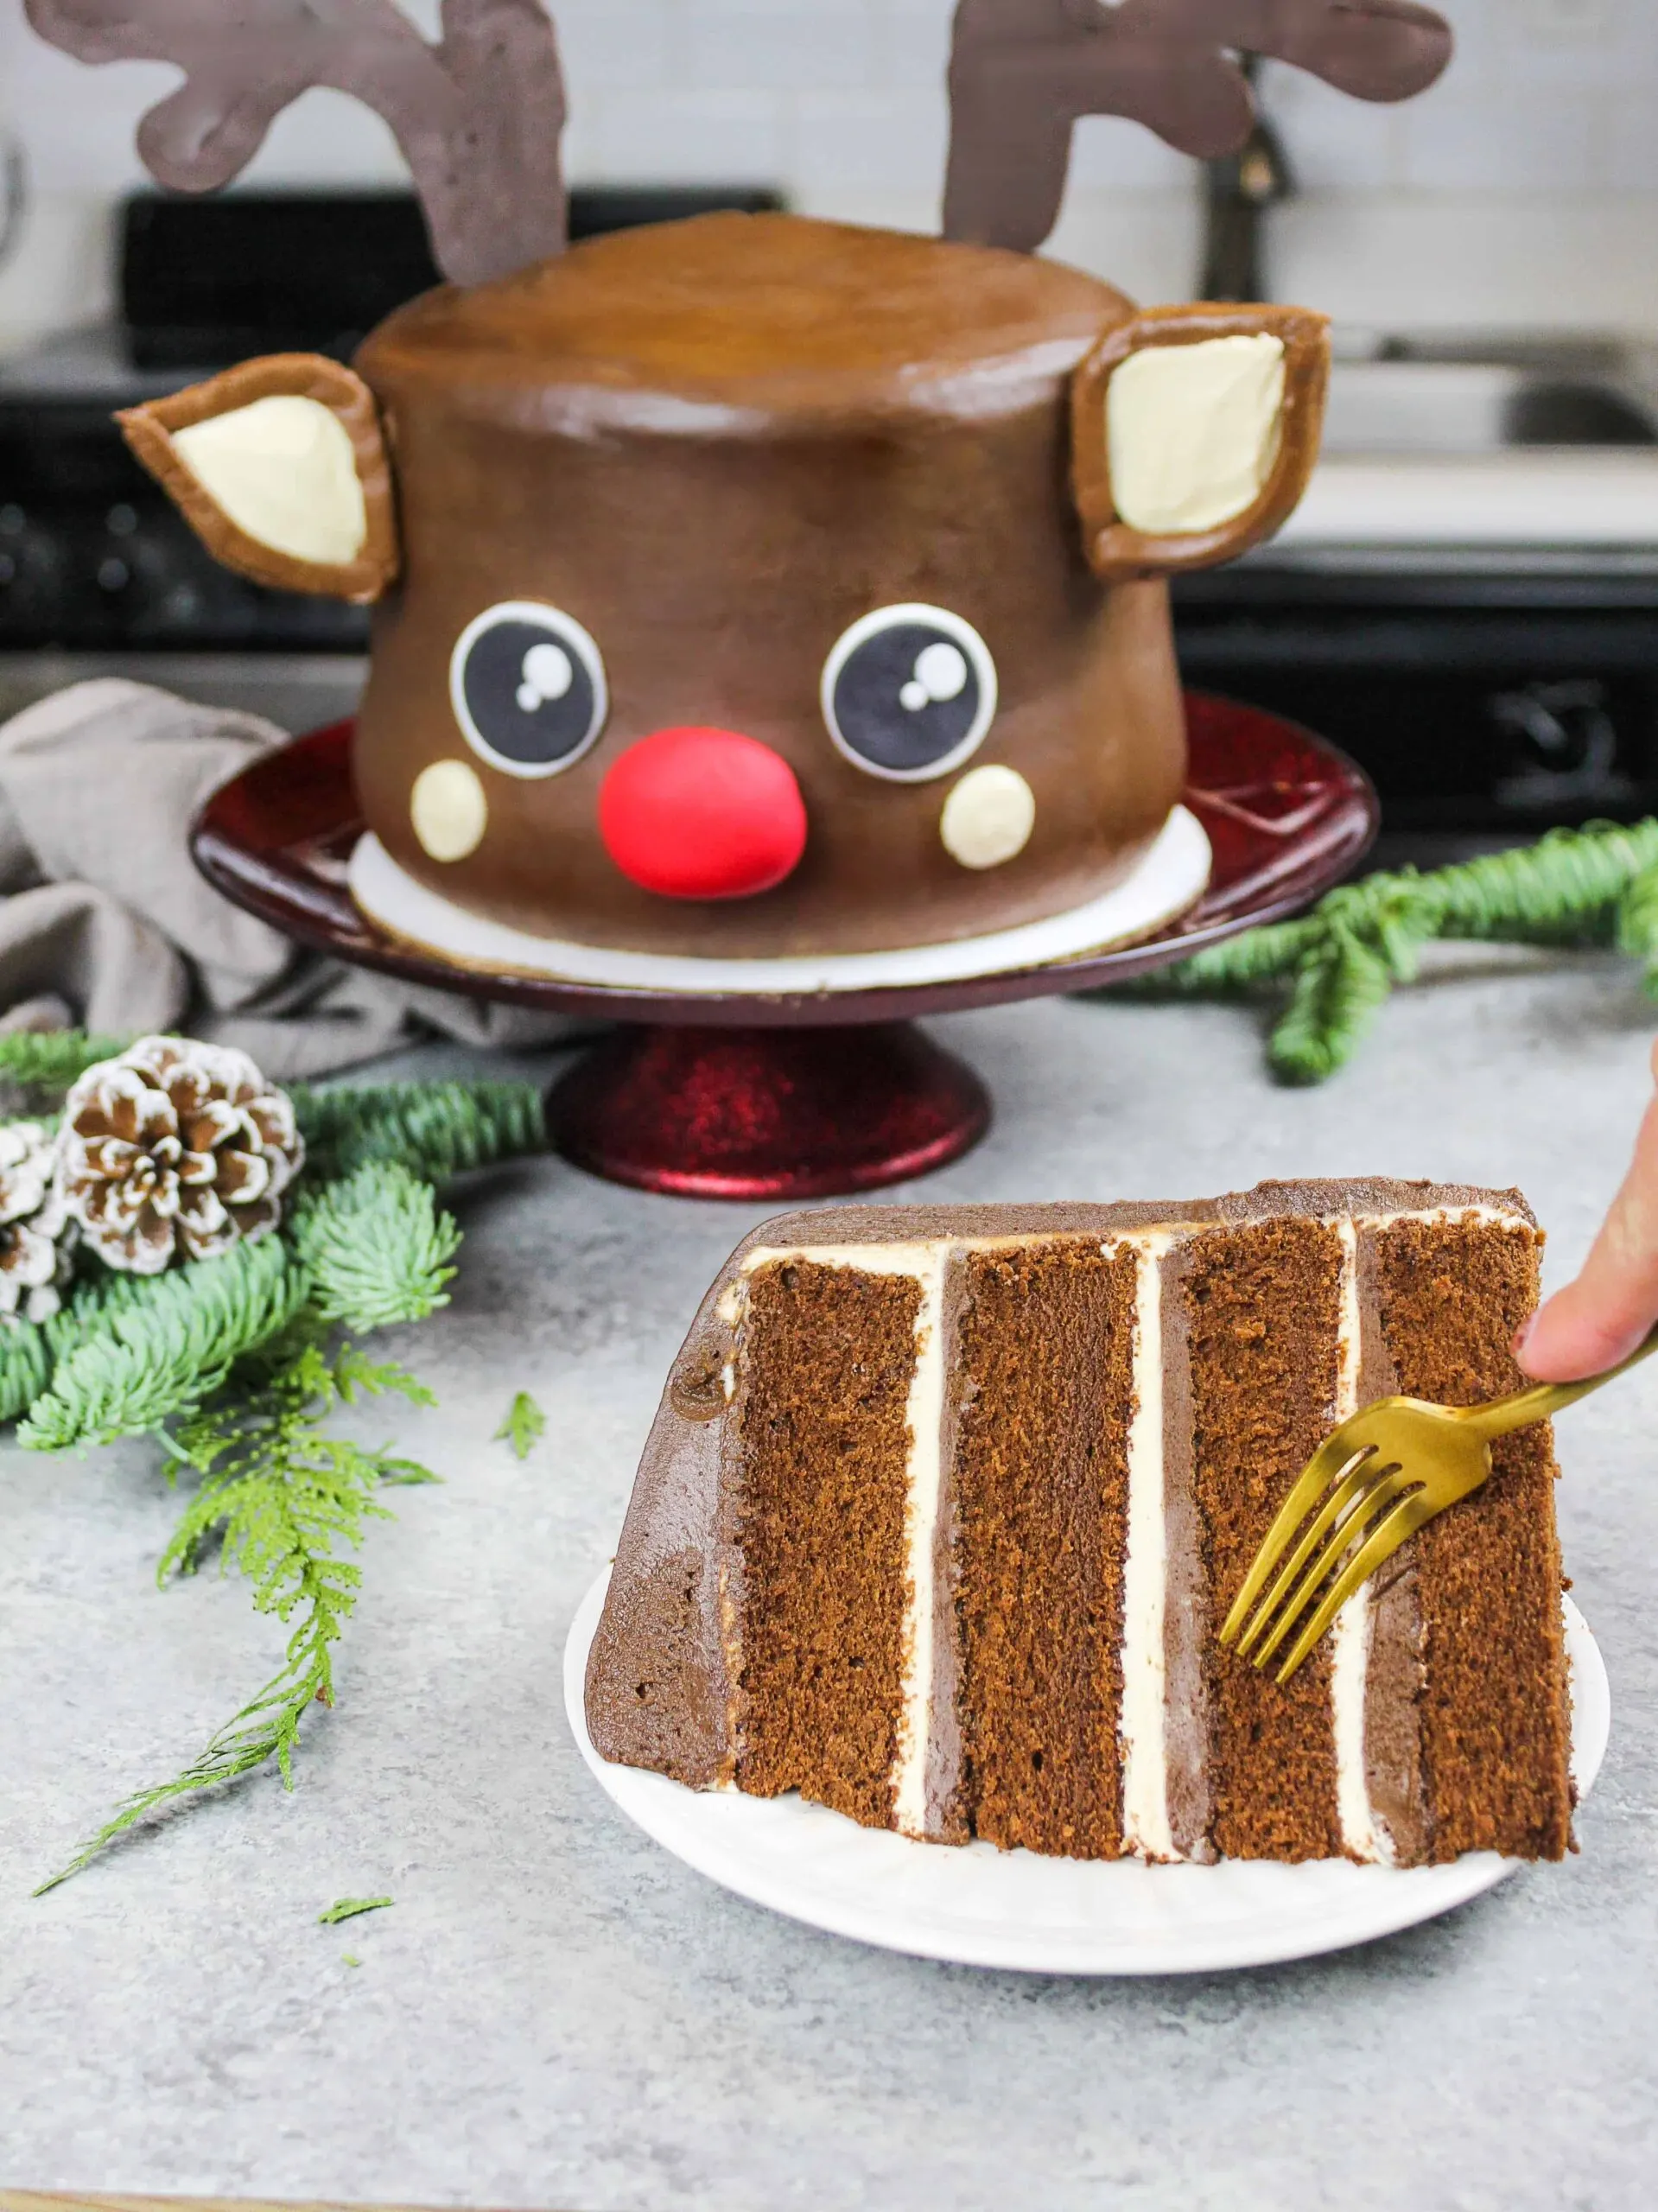 image of a chocolate peanut butter rudolph cake that's been cut into to show how moist and fluffy the cake layers are